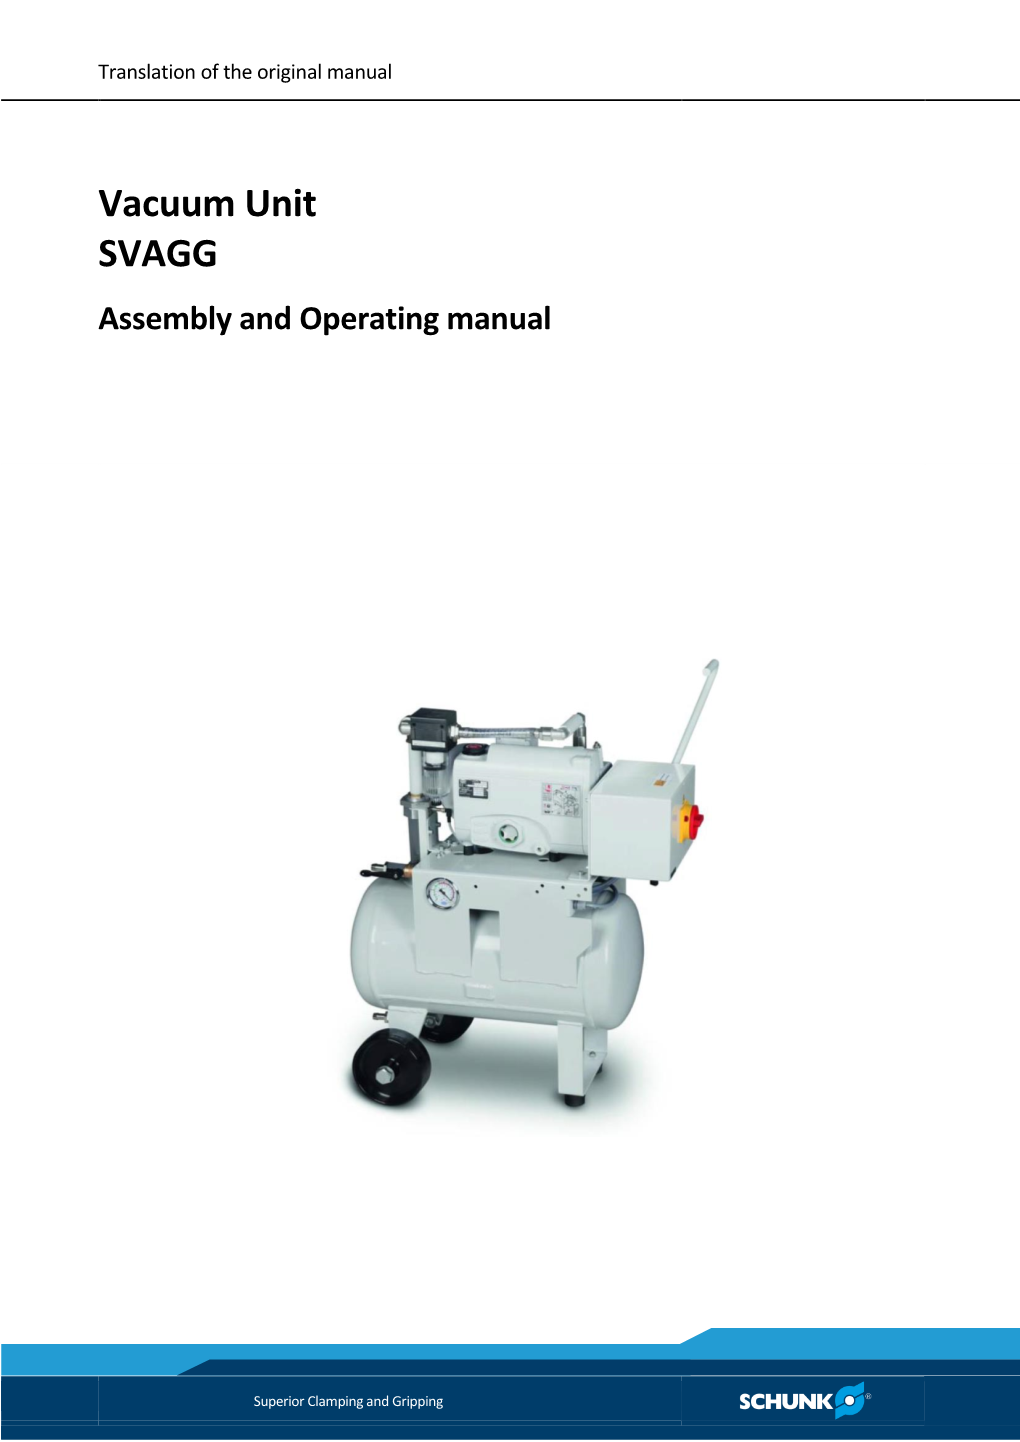 Vacuum Unit SVAGG Assembly and Operating Manual